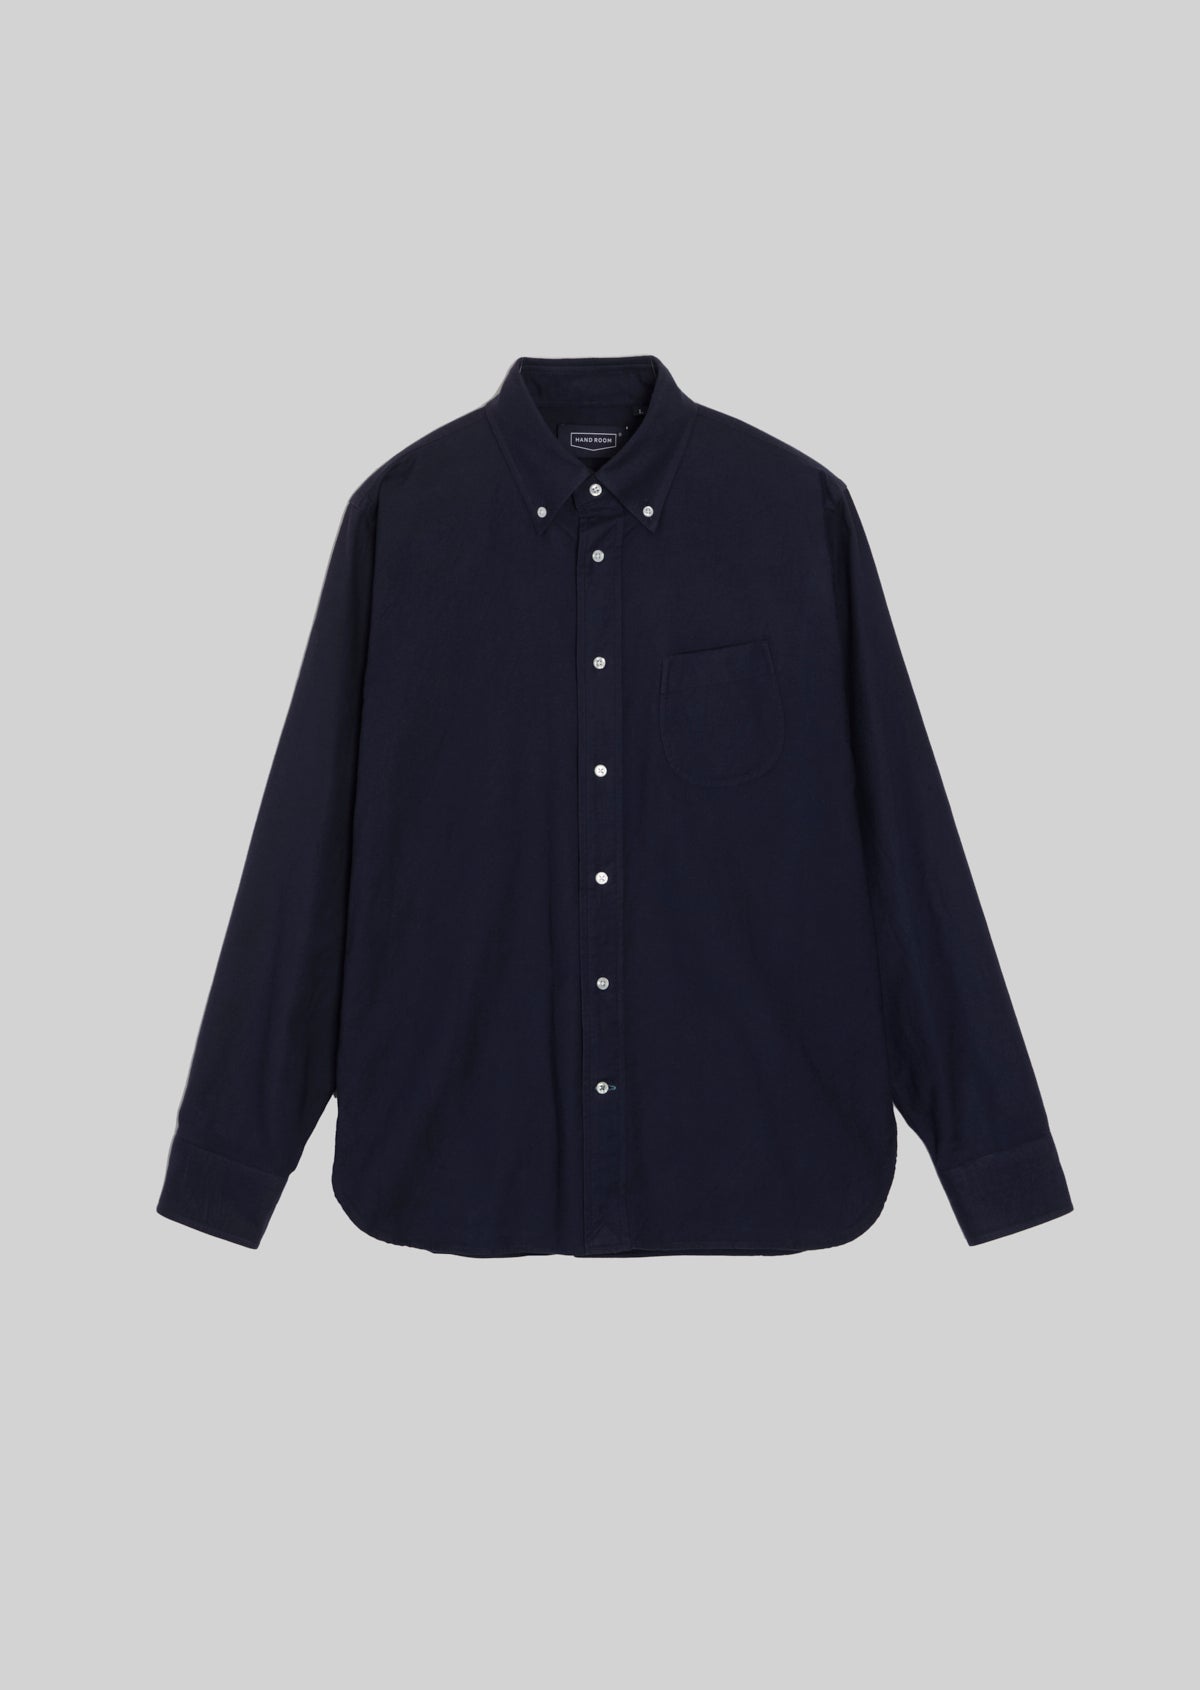 OX FORD BUTTON DOWN SHIRTS NAVY　8061-1101